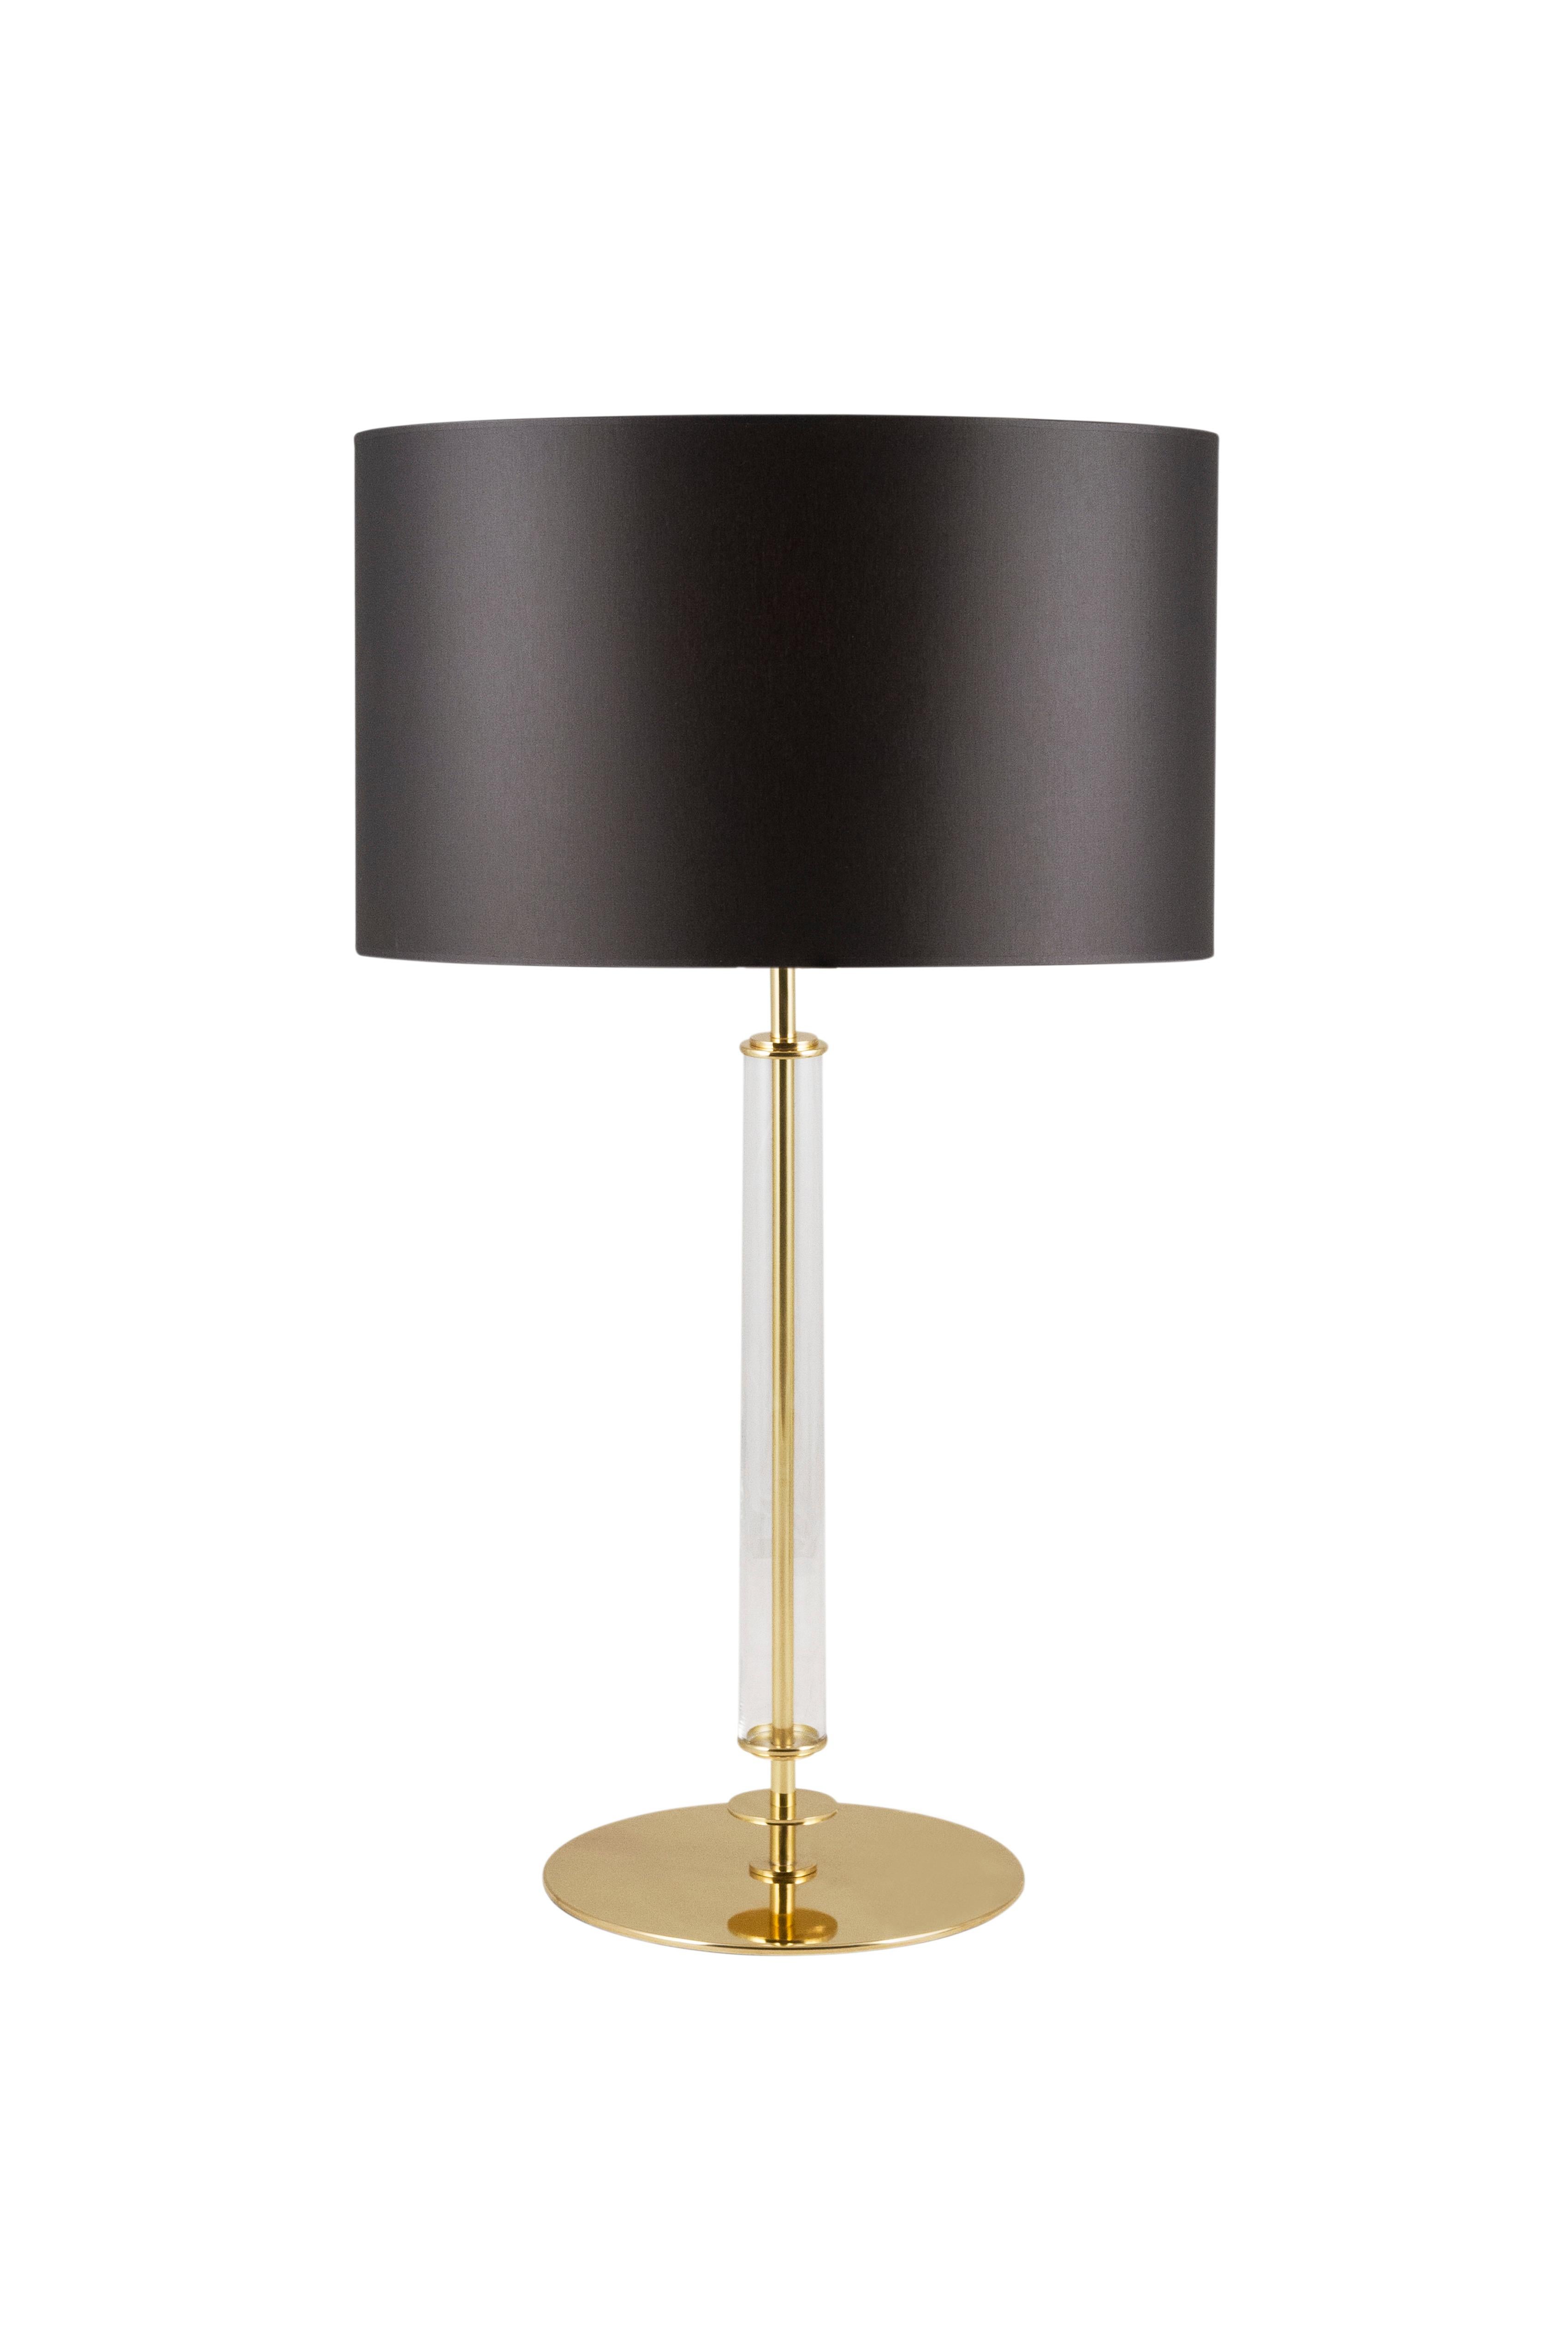 Brass Set of 2 Art Deco Table Lamps, Vaz Table Lamp, Black Shade, Handmade in Portugal For Sale